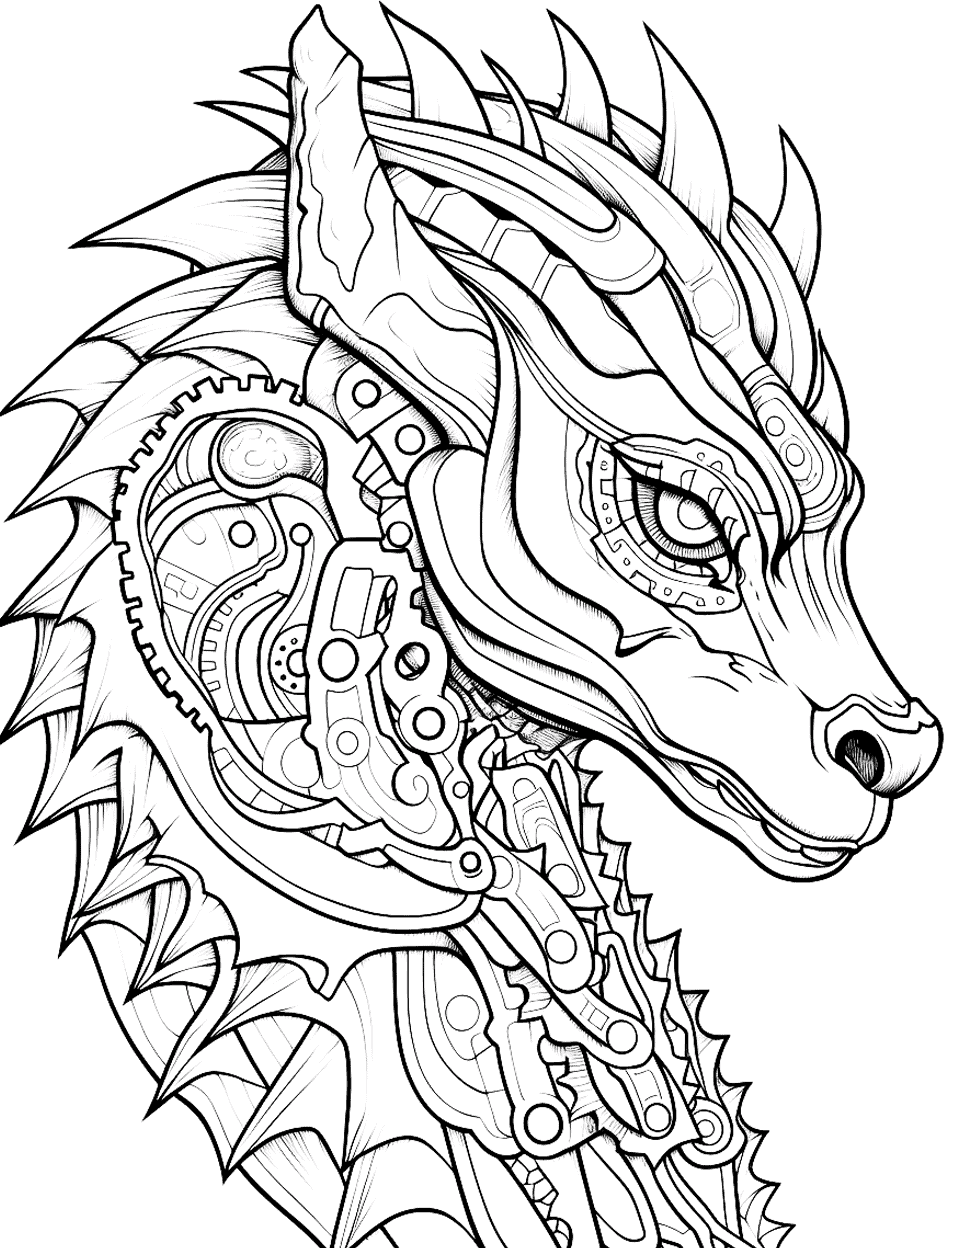 Steampunk Dragon Adult Coloring Page - A detailed steampunk dragon made of gears and mechanical parts.